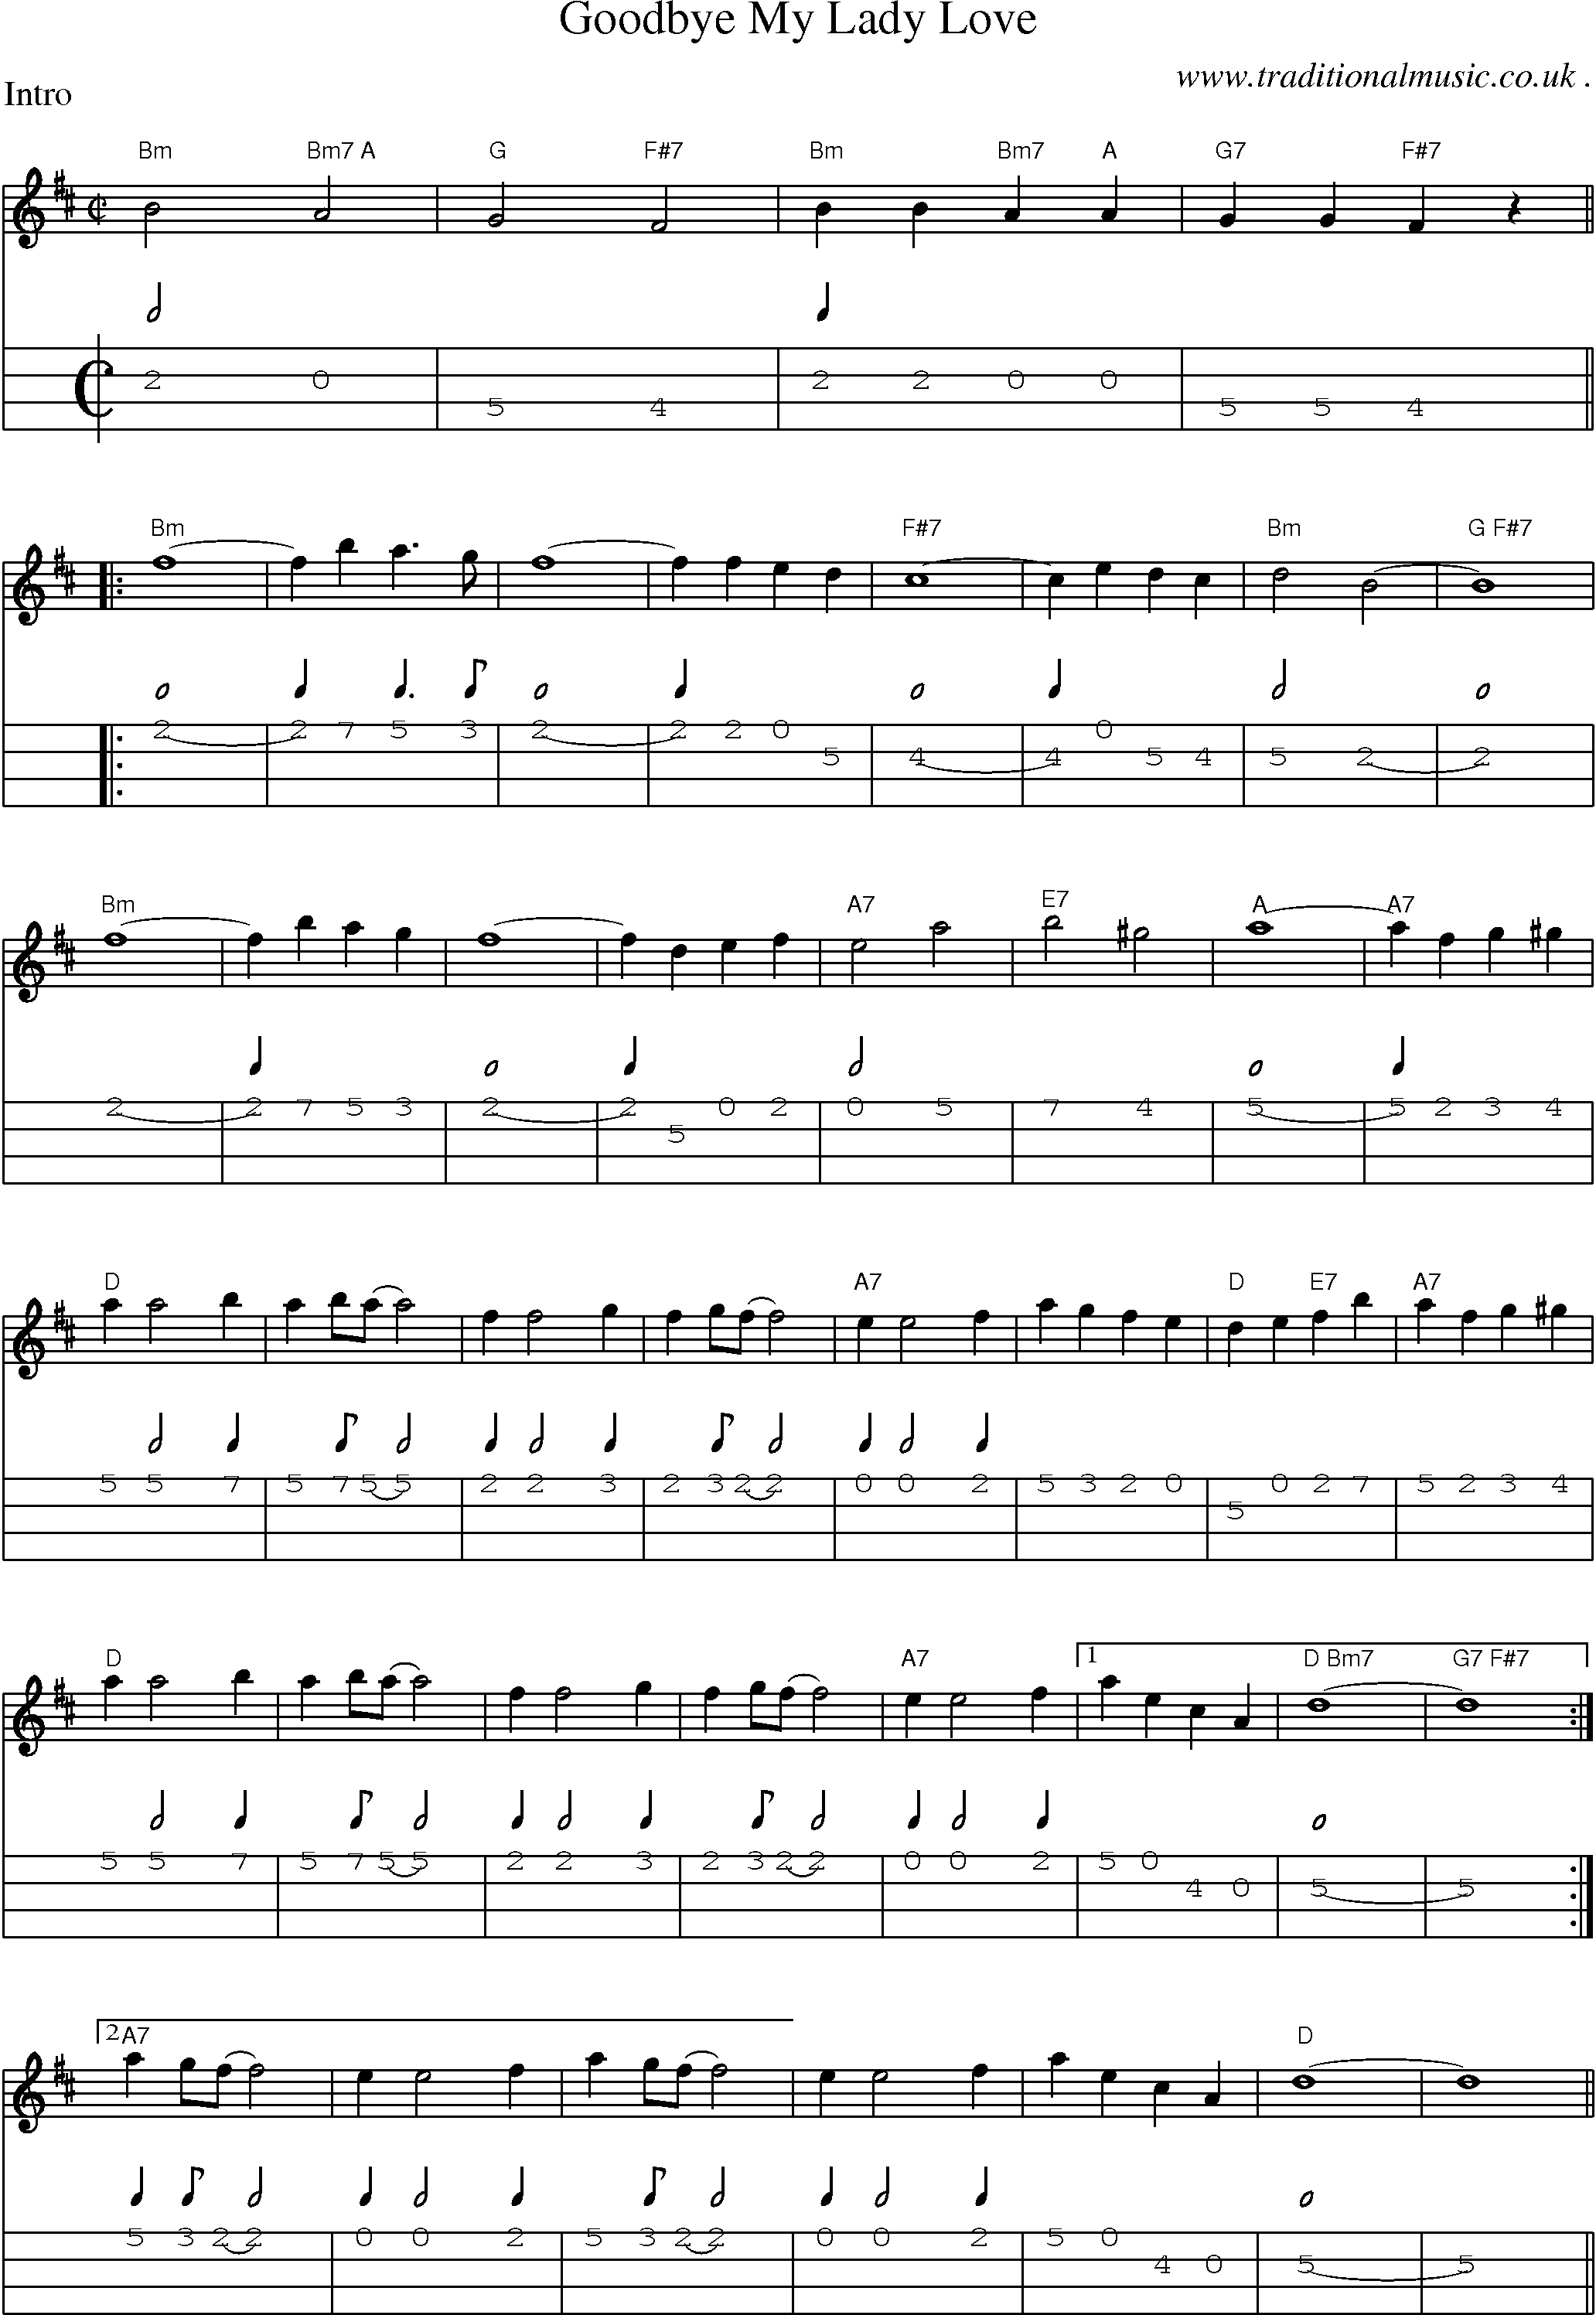 Music Score and Guitar Tabs for Goodbye My Lady Love